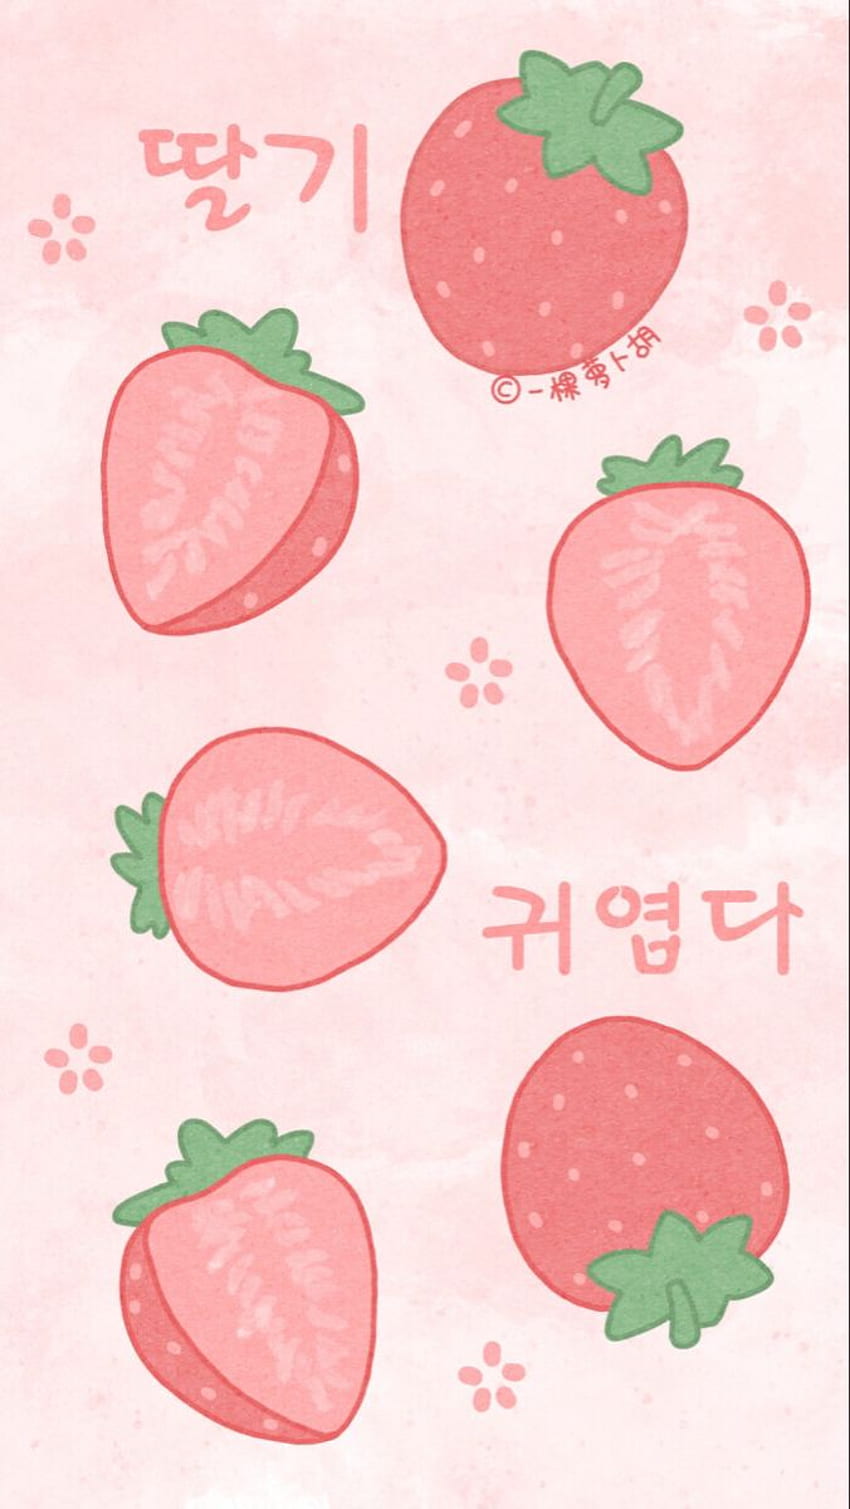 A poster with strawberries and flowers on it - Strawberry